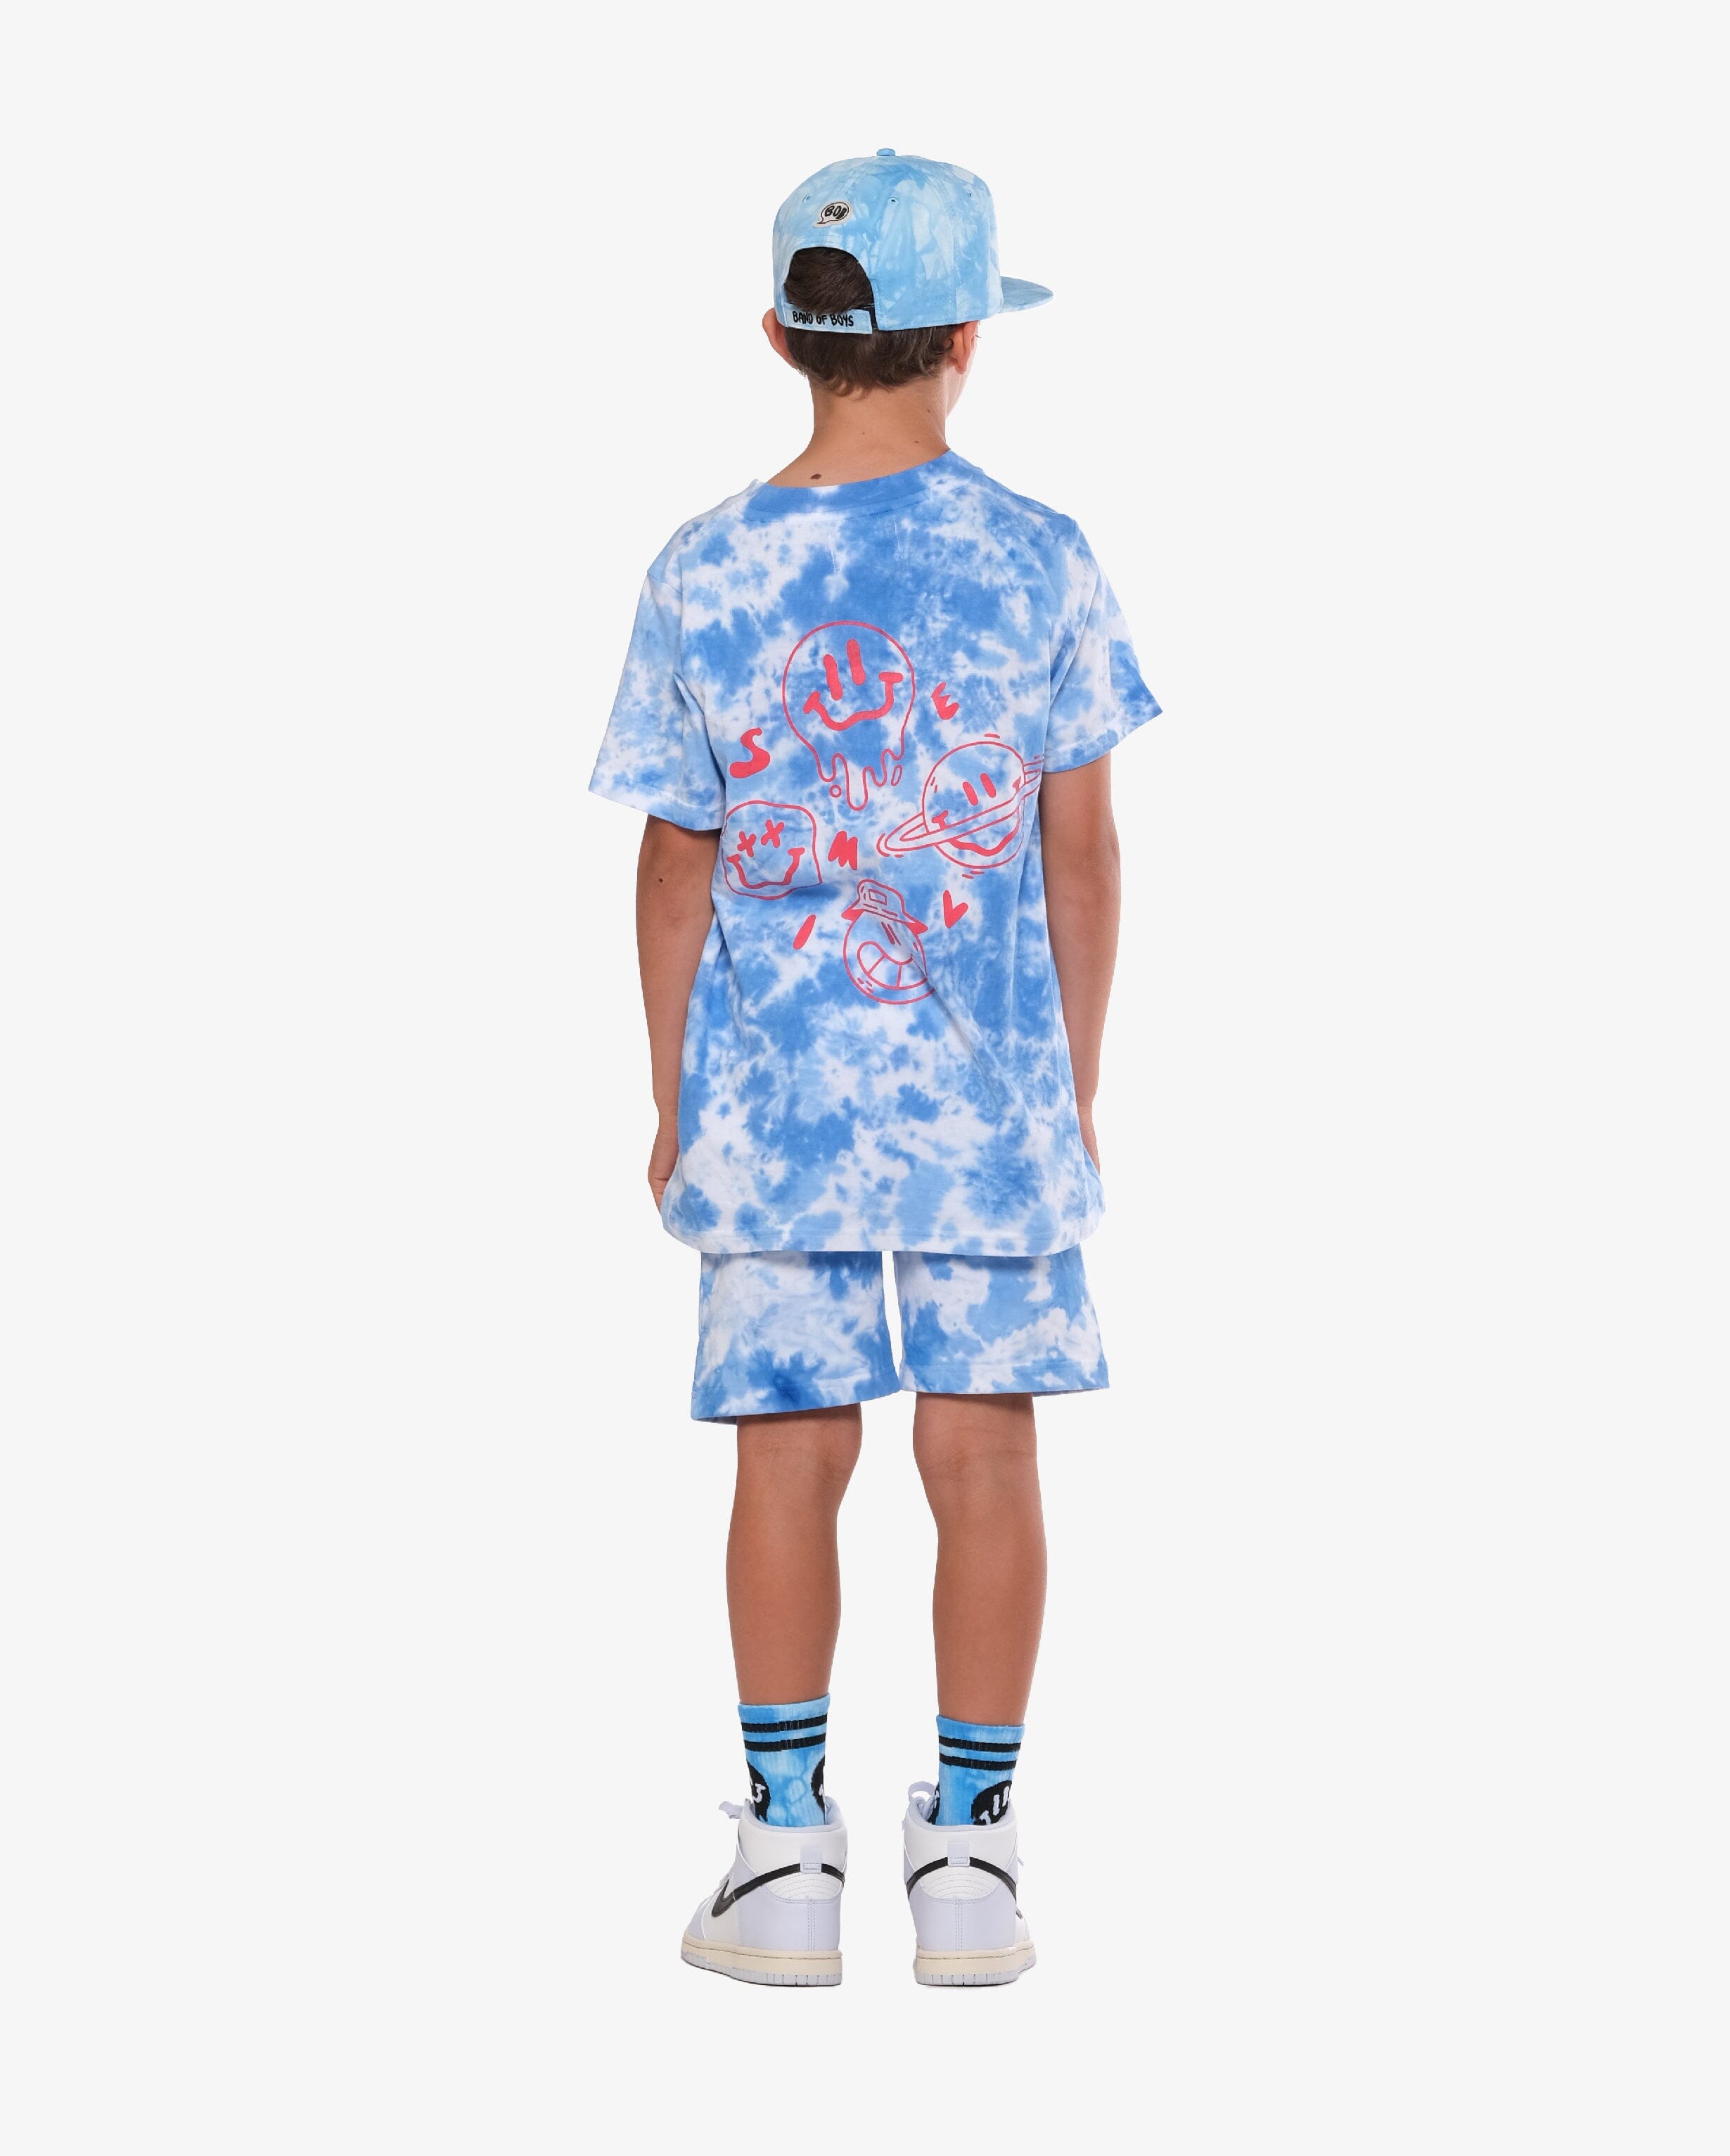 BAND OF BOYS | Drippin in Smiles Shorts - Blue Tie Dye Boys Band of Boys